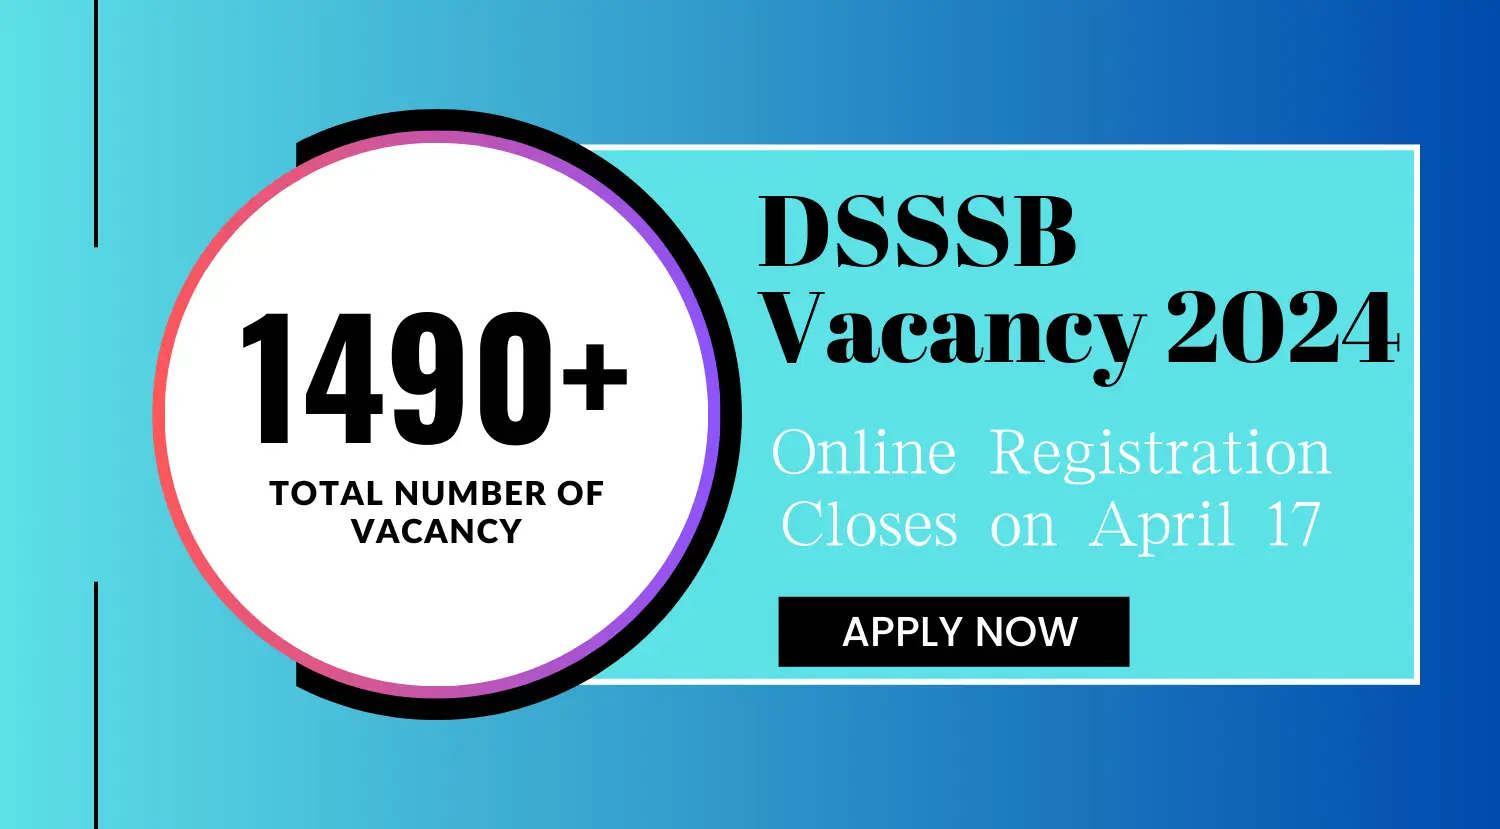 DSSSB Vacancy 2024 Online Registration Closes on April 17 Heres How to Apply